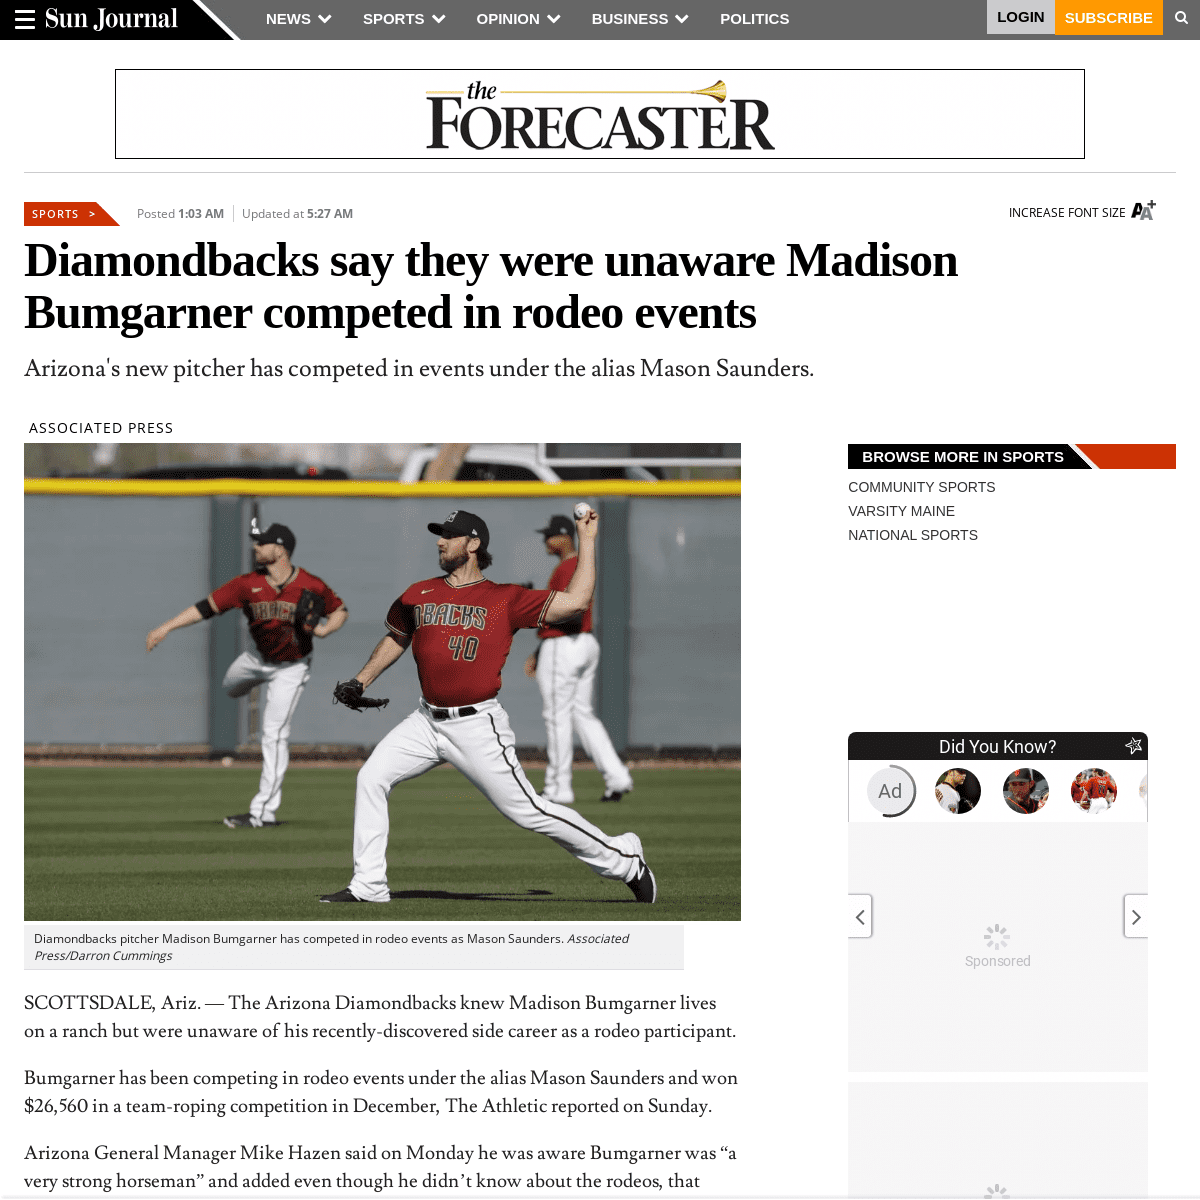 A complete backup of www.sunjournal.com/2020/02/25/diamondbacks-say-they-were-unaware-madison-bumgarner-competed-in-rodeo-events